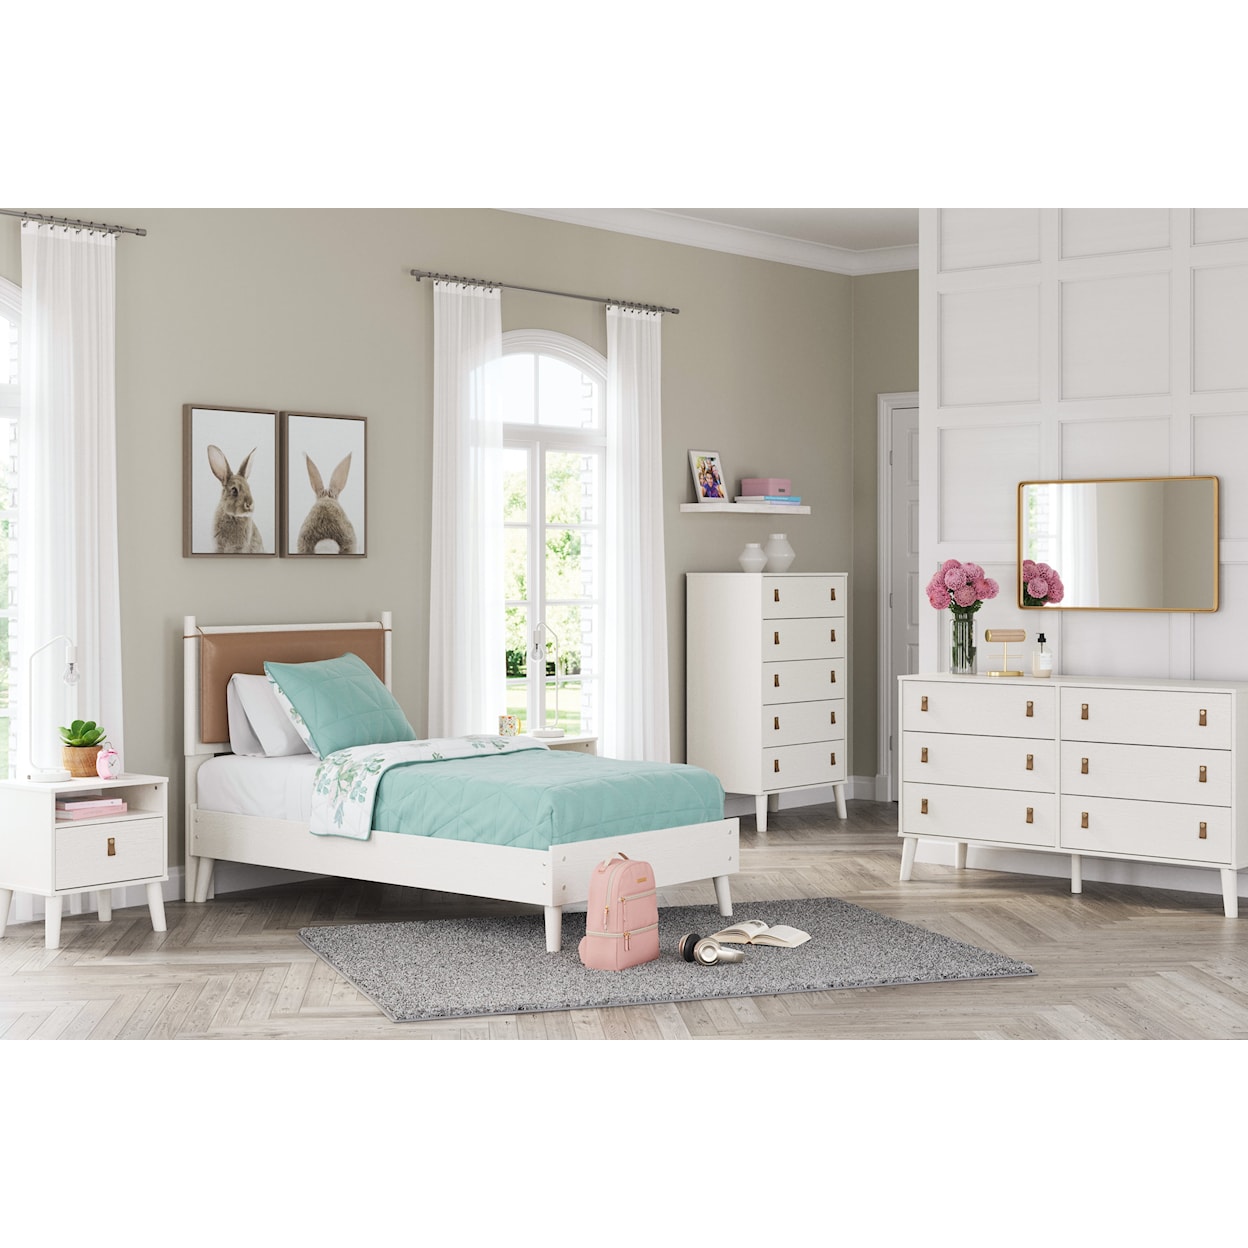 Signature Design by Ashley Aprilyn Twin Bedroom Set